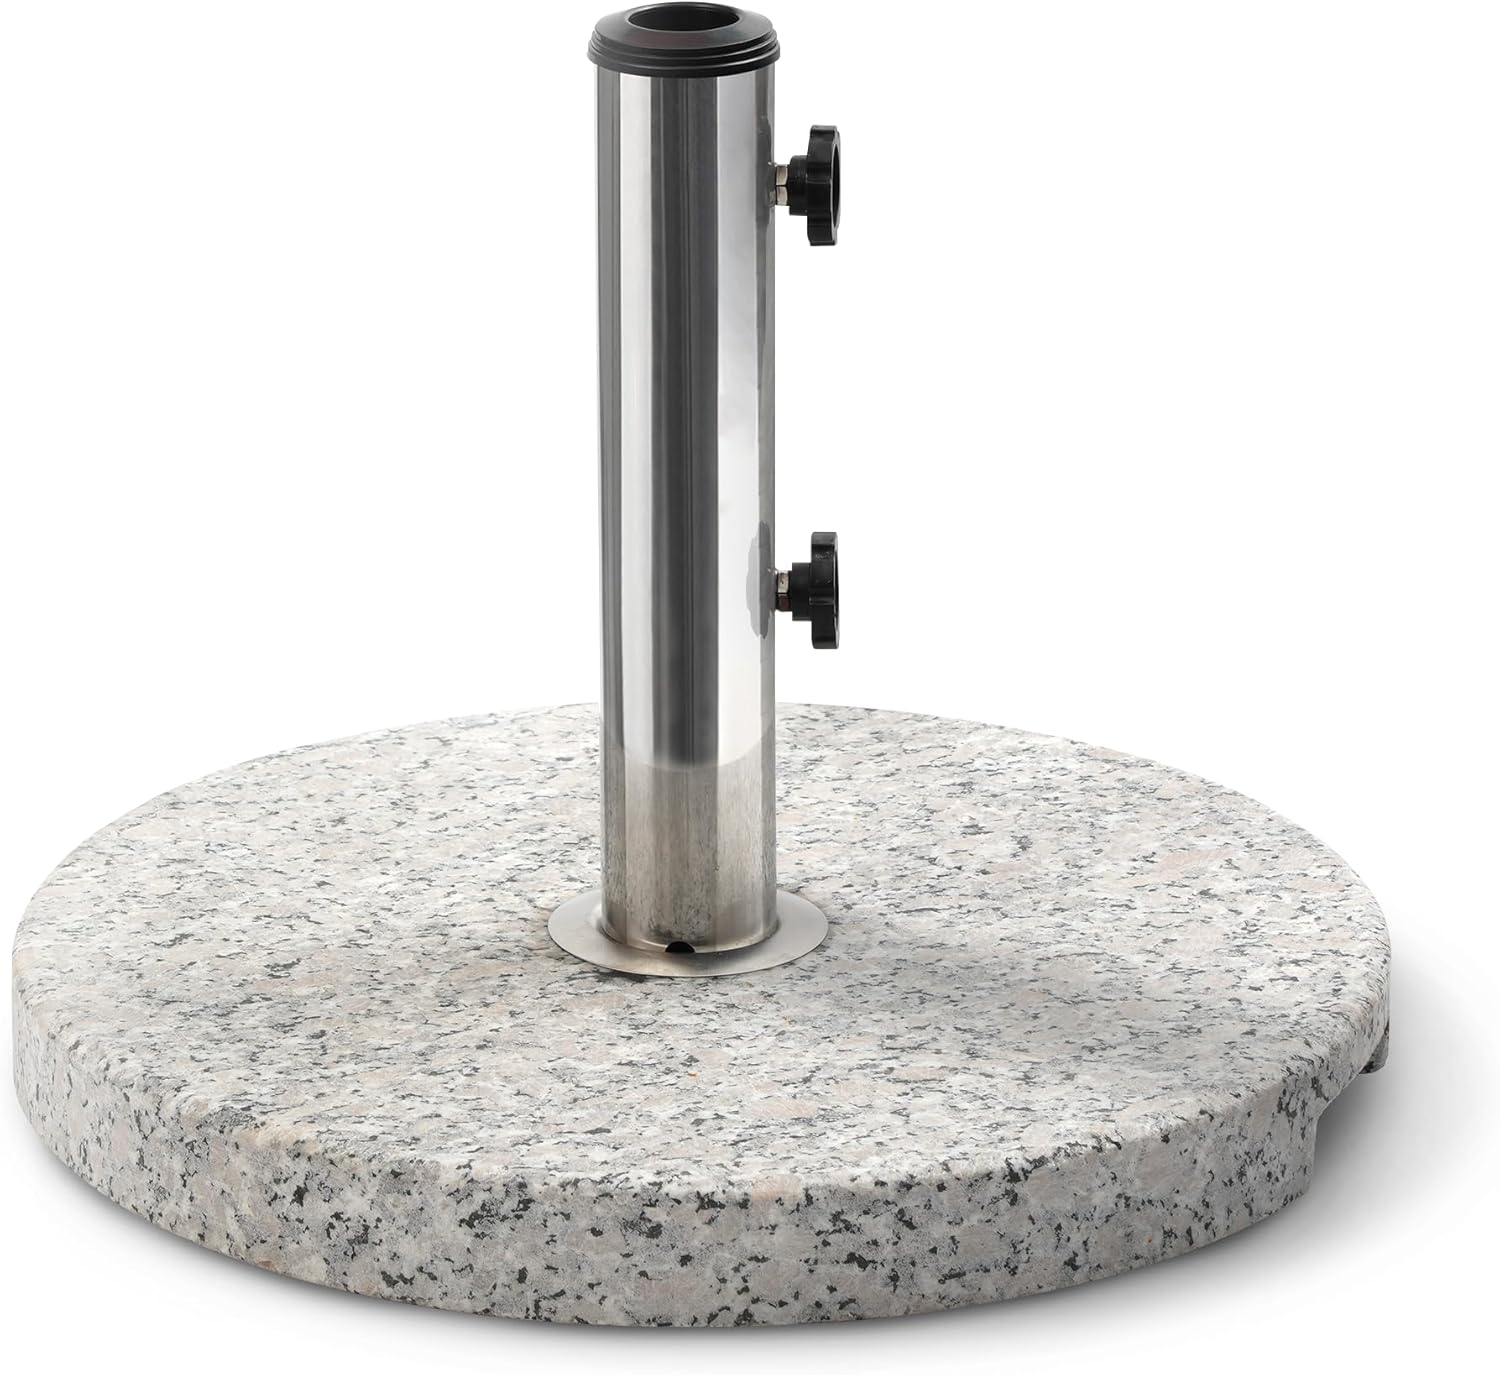 KEPLIN 20kg Parasol Base Stand - Stable, Easy Assembly, Stainless Steel & Granite 20kg Round Umbrella stand for Garden & Patio